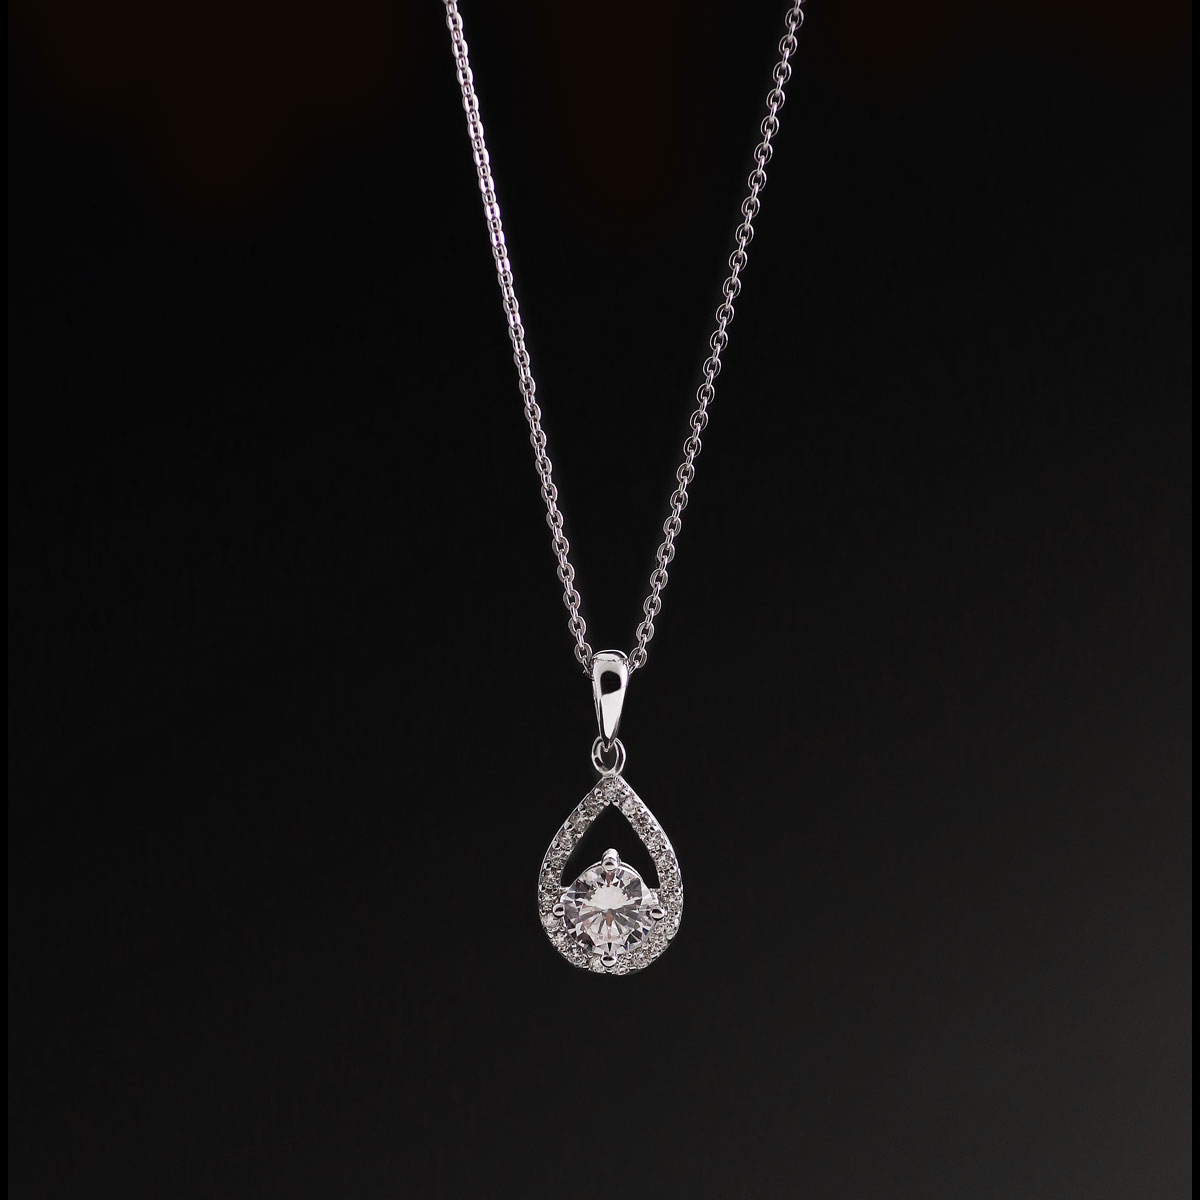 Cashs Ireland, Crystal Sterling Silver Teardrop Pave Solitaire Pendant Necklace